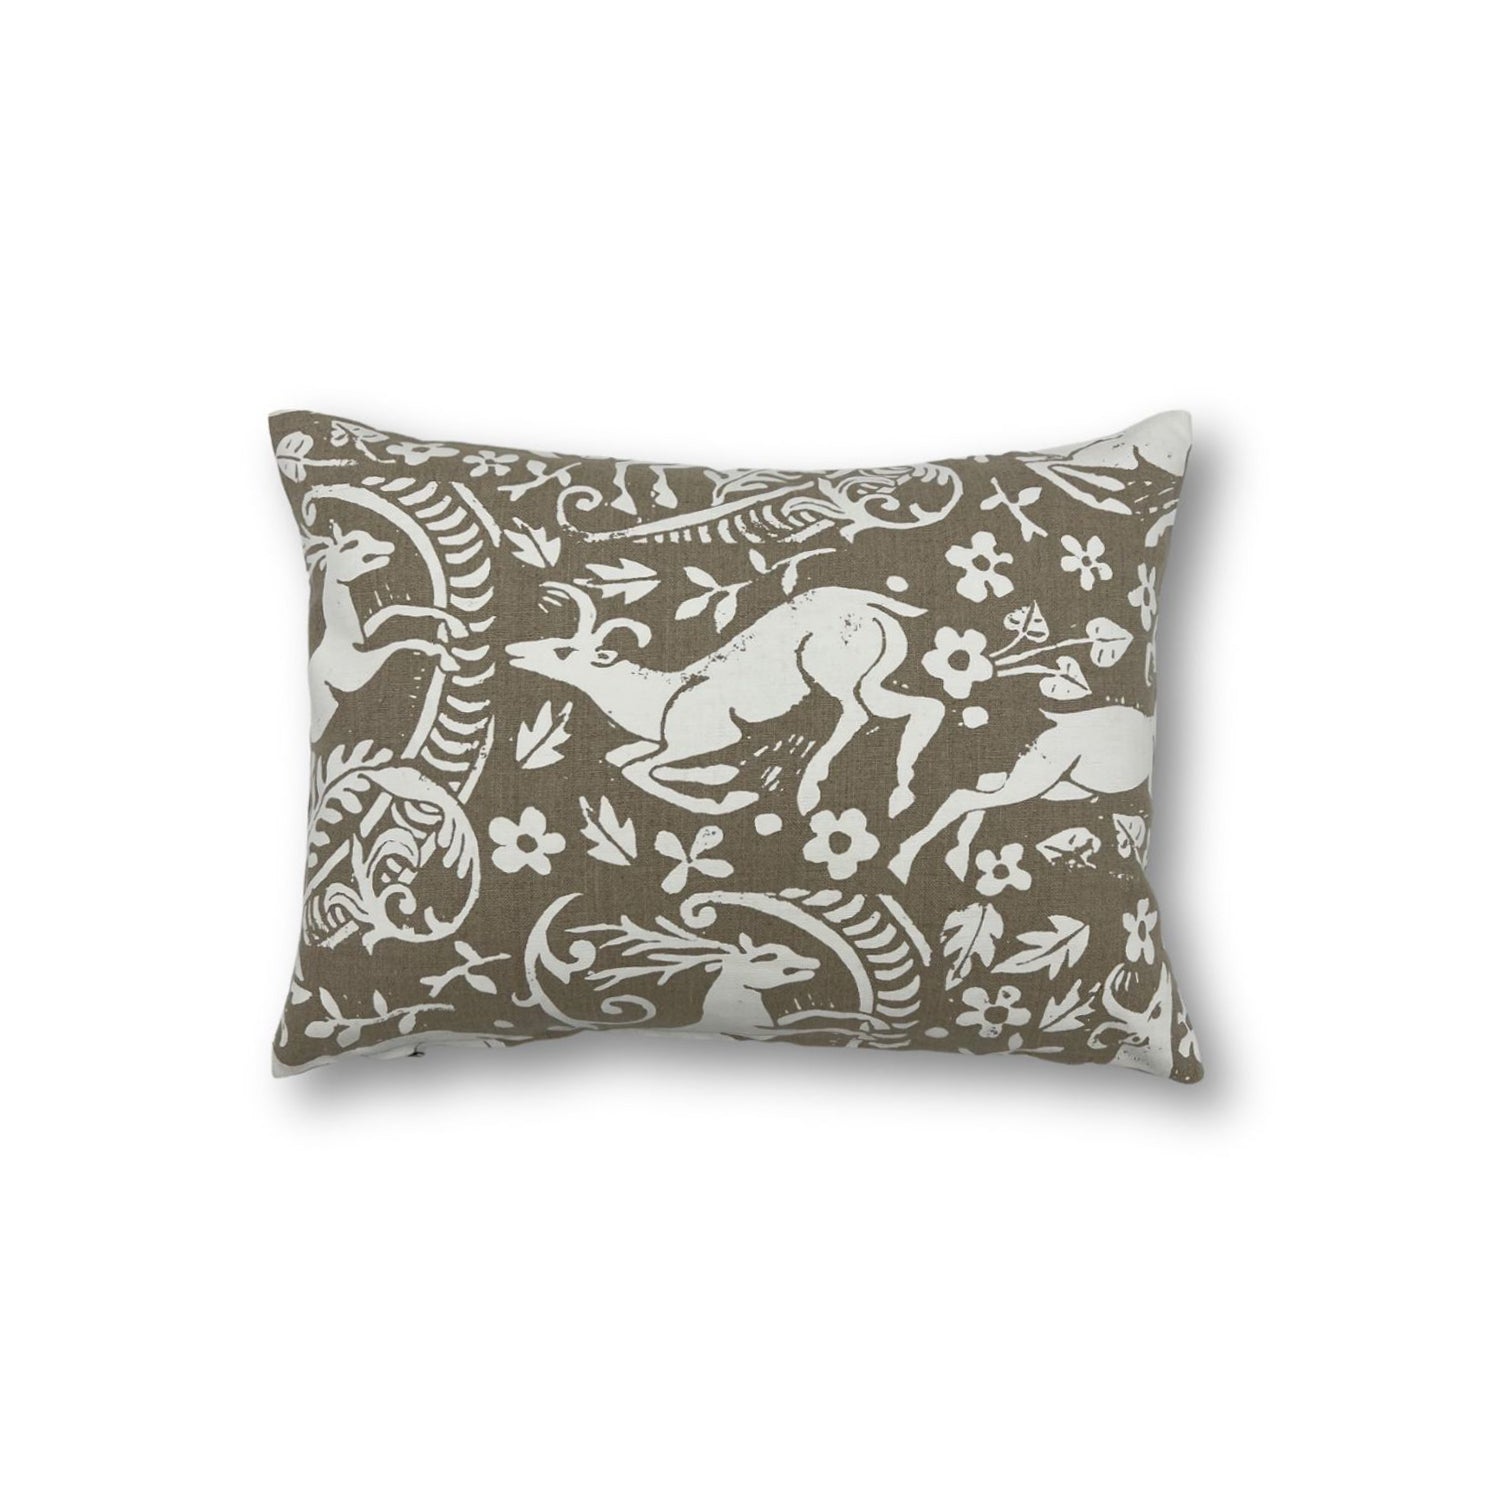 Rectangular throw pillow with a white ram and botanical printed pattern on a natural linen background. 